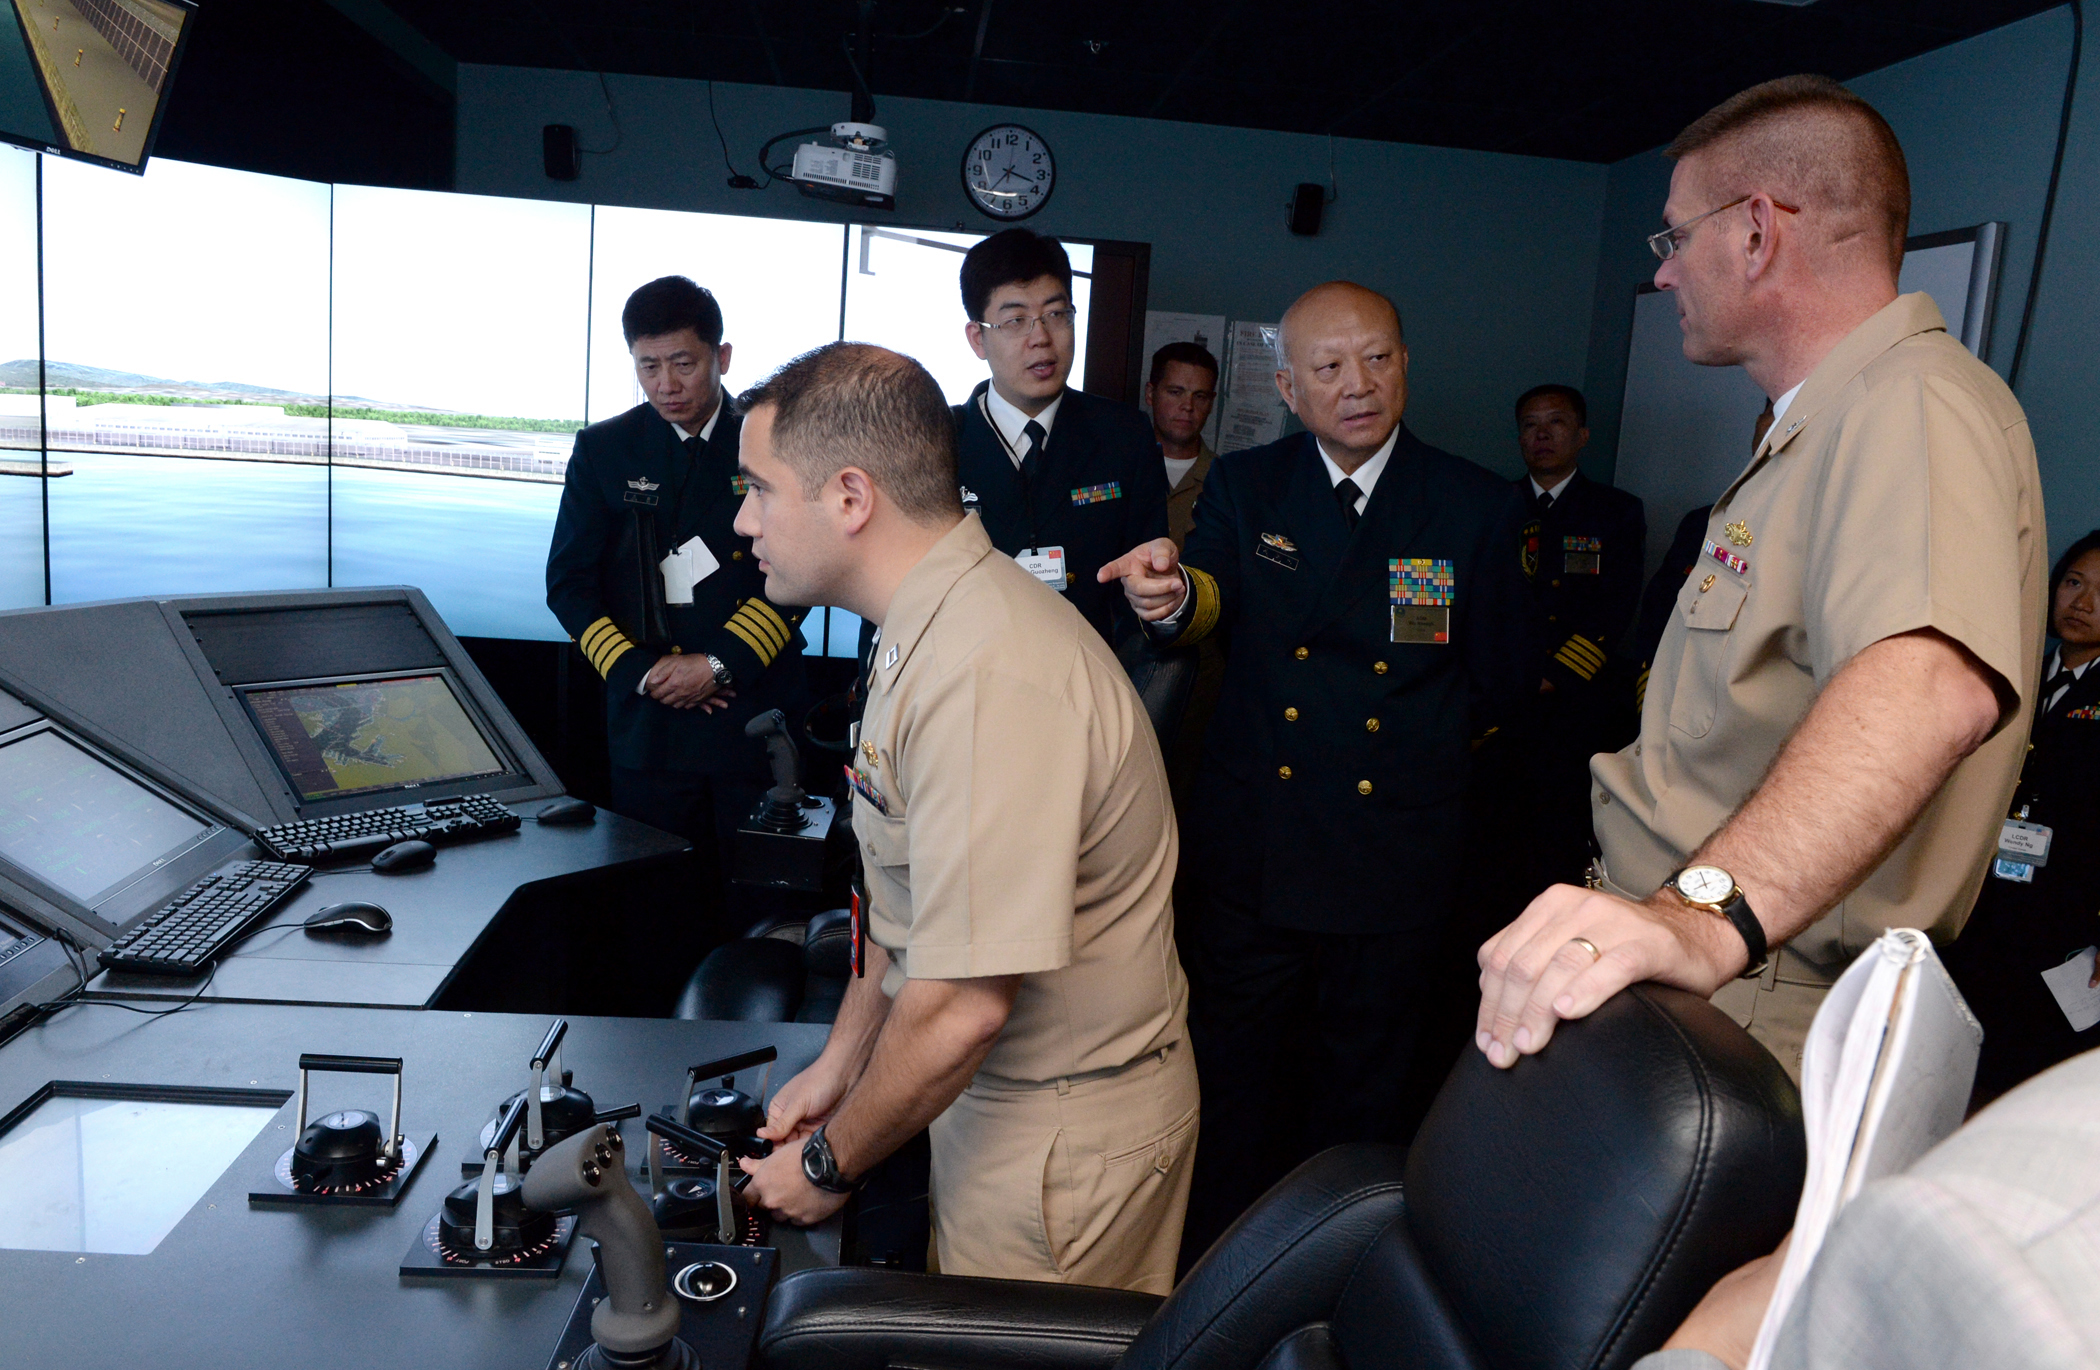 140918-N-PX557-211 NEWPORT, R.I. (Sept. 18, 2014) Capt. Dave Welch (right), commanding officer, Surface Warfare Officers School (SWOS), provides a tour for Commander in Chief of the People's Liberation army navy of the People's Republic of China Adm. Wu Shengli at the SWOS onboard Naval Station Newport in Newport, Rhode Island. SWOS provides a continuum of professional education and training in support of surface Navy requirements that prepares officers and enlisted engineers to serve at sea. Shengli is currently in Newport attending the Chief of Naval Operations’ 21st International Seapower Symposium at U.S. Navy War College. More than 170 senior officers and civilians from more than 100 countries, including many of the senior-most officers from those countries’ navies, are currently attending the biennial event Sept. 16-19. (U.S. Navy photo by Chief Mass Communication Specialist James E. Foehl/Released)